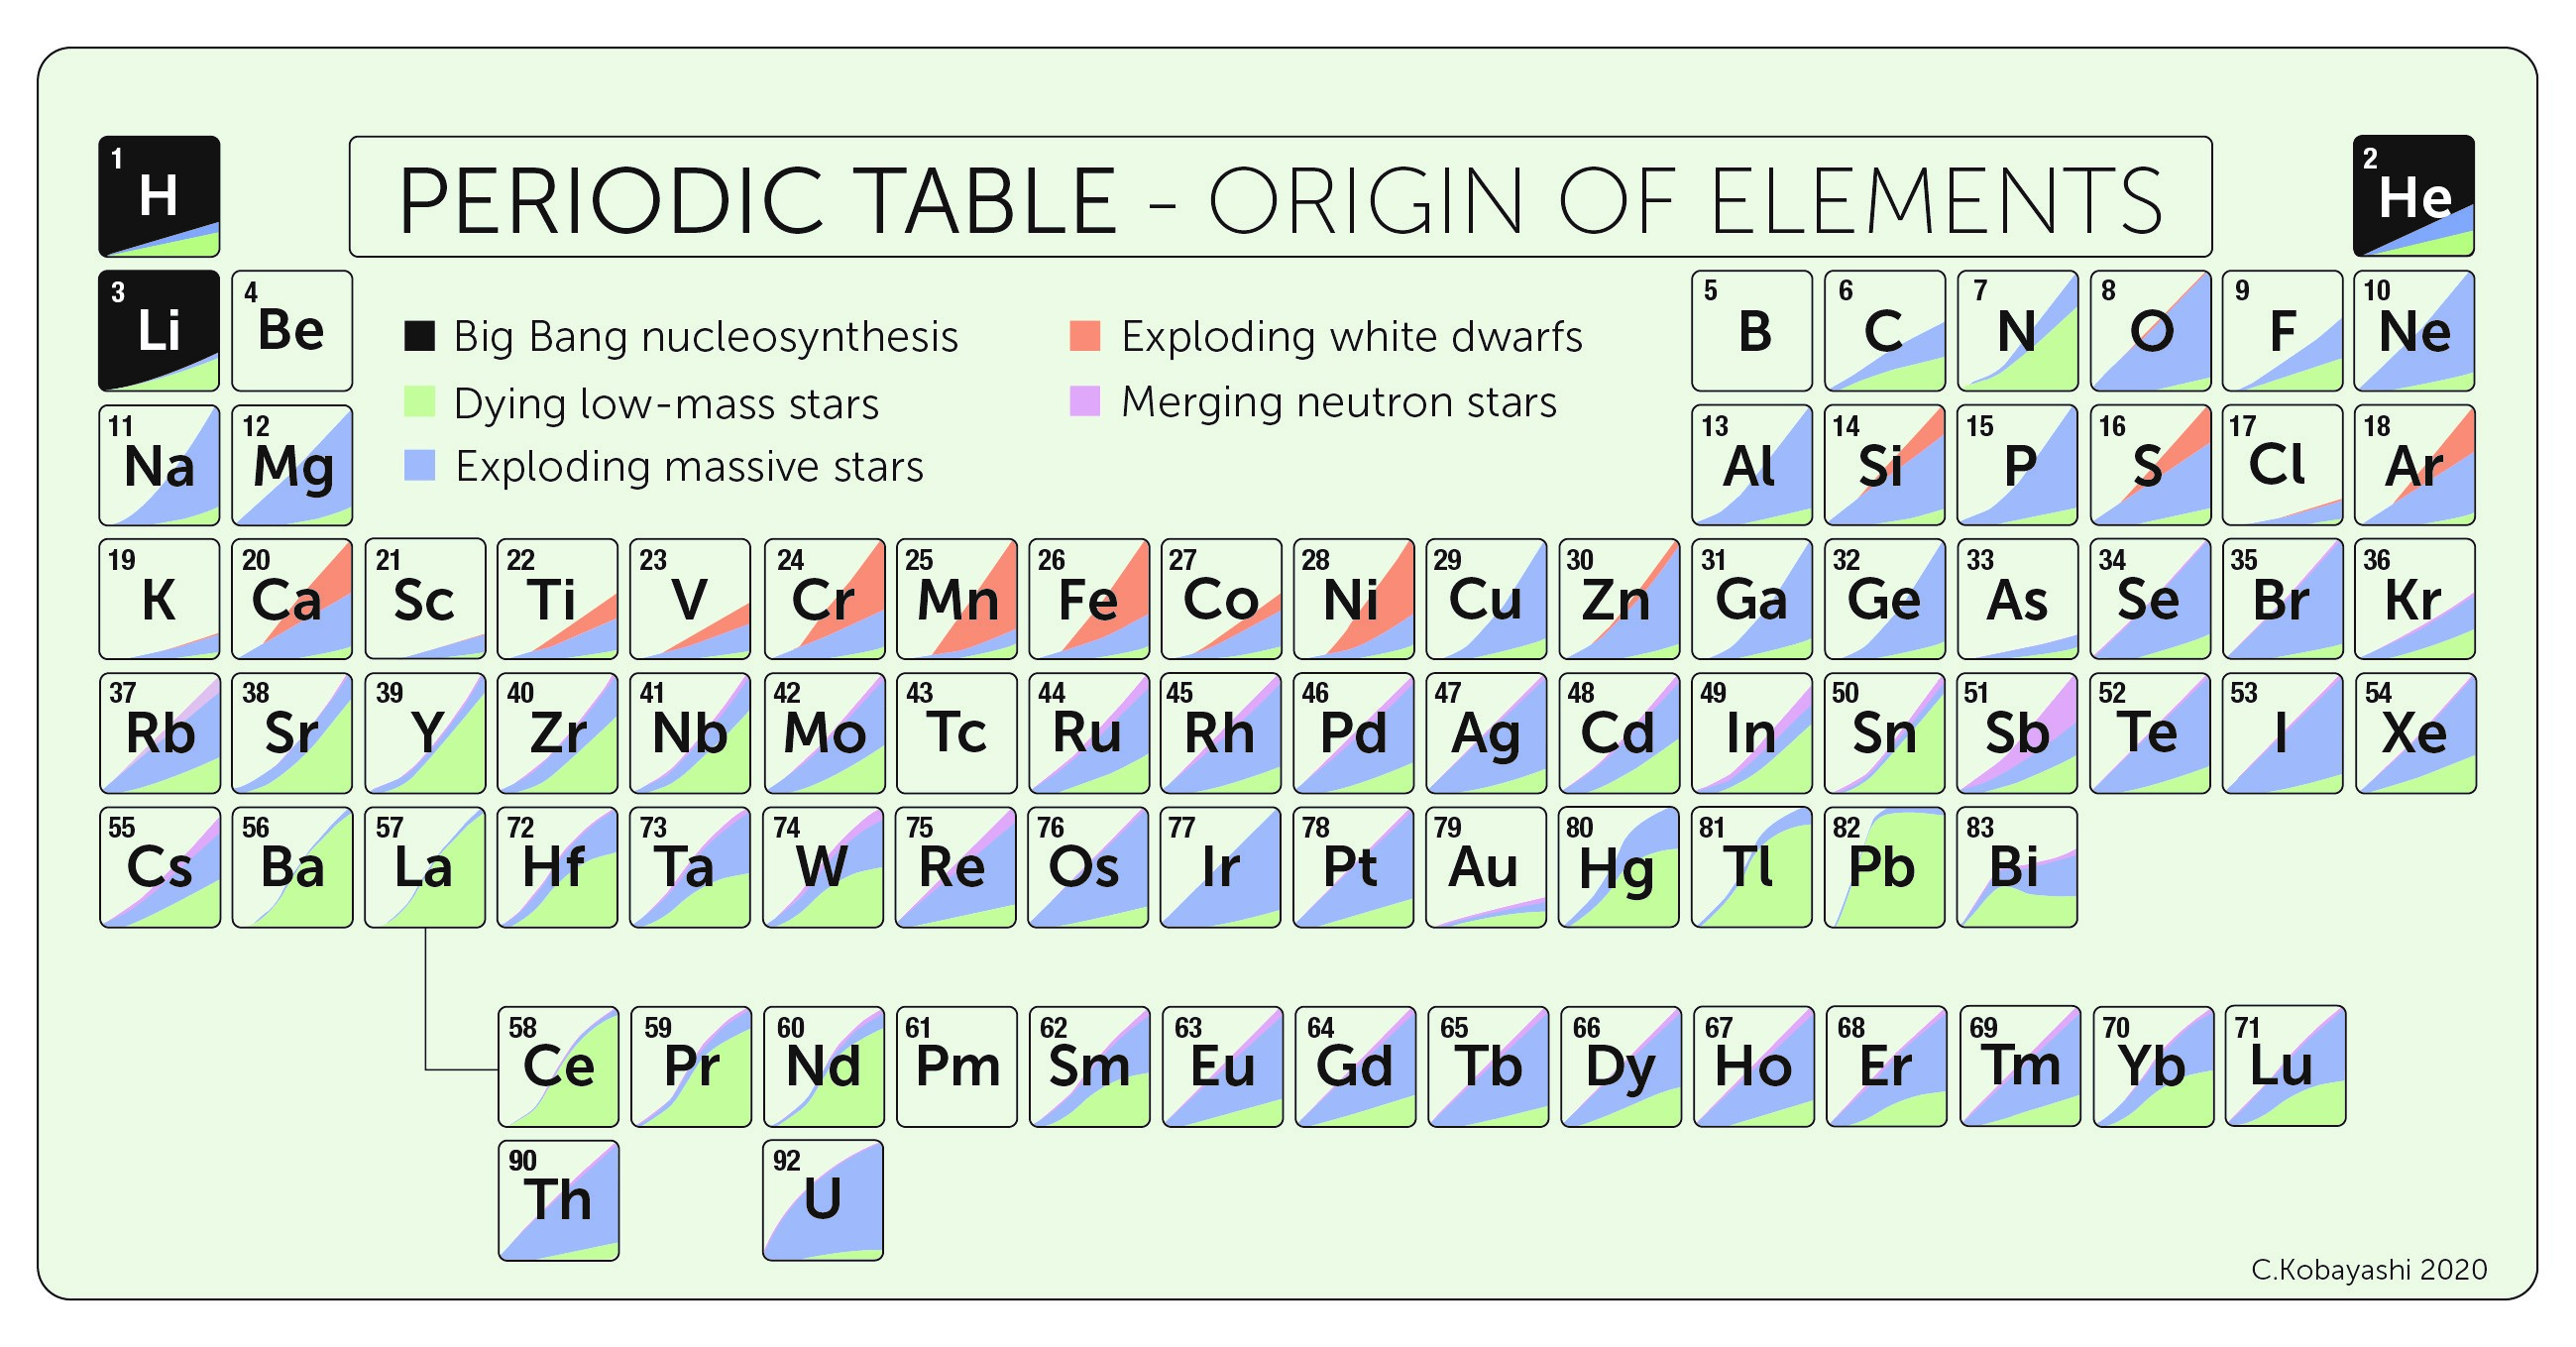 The Periodic Table, showing naturally occurring elements up to uranium. Shading indicates stellar origin.